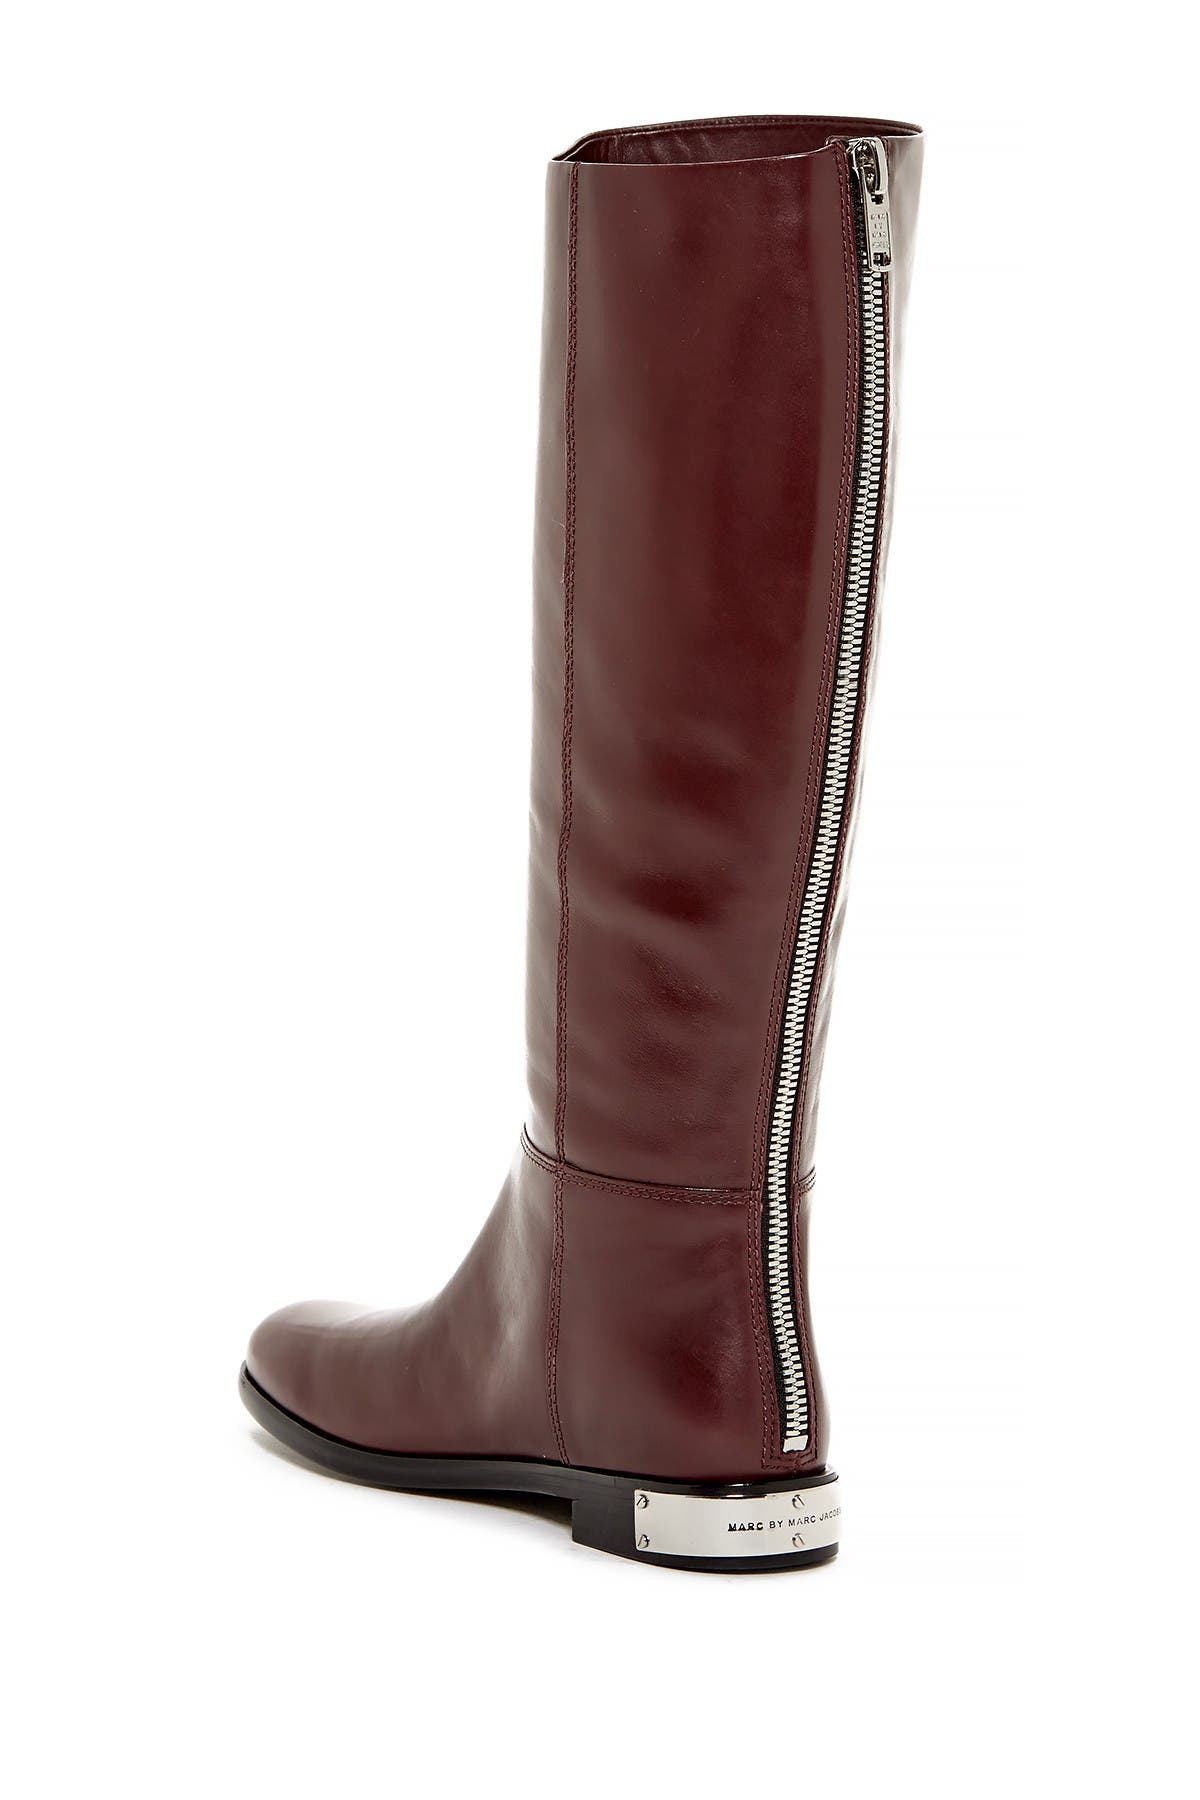 marc jacobs riding boots